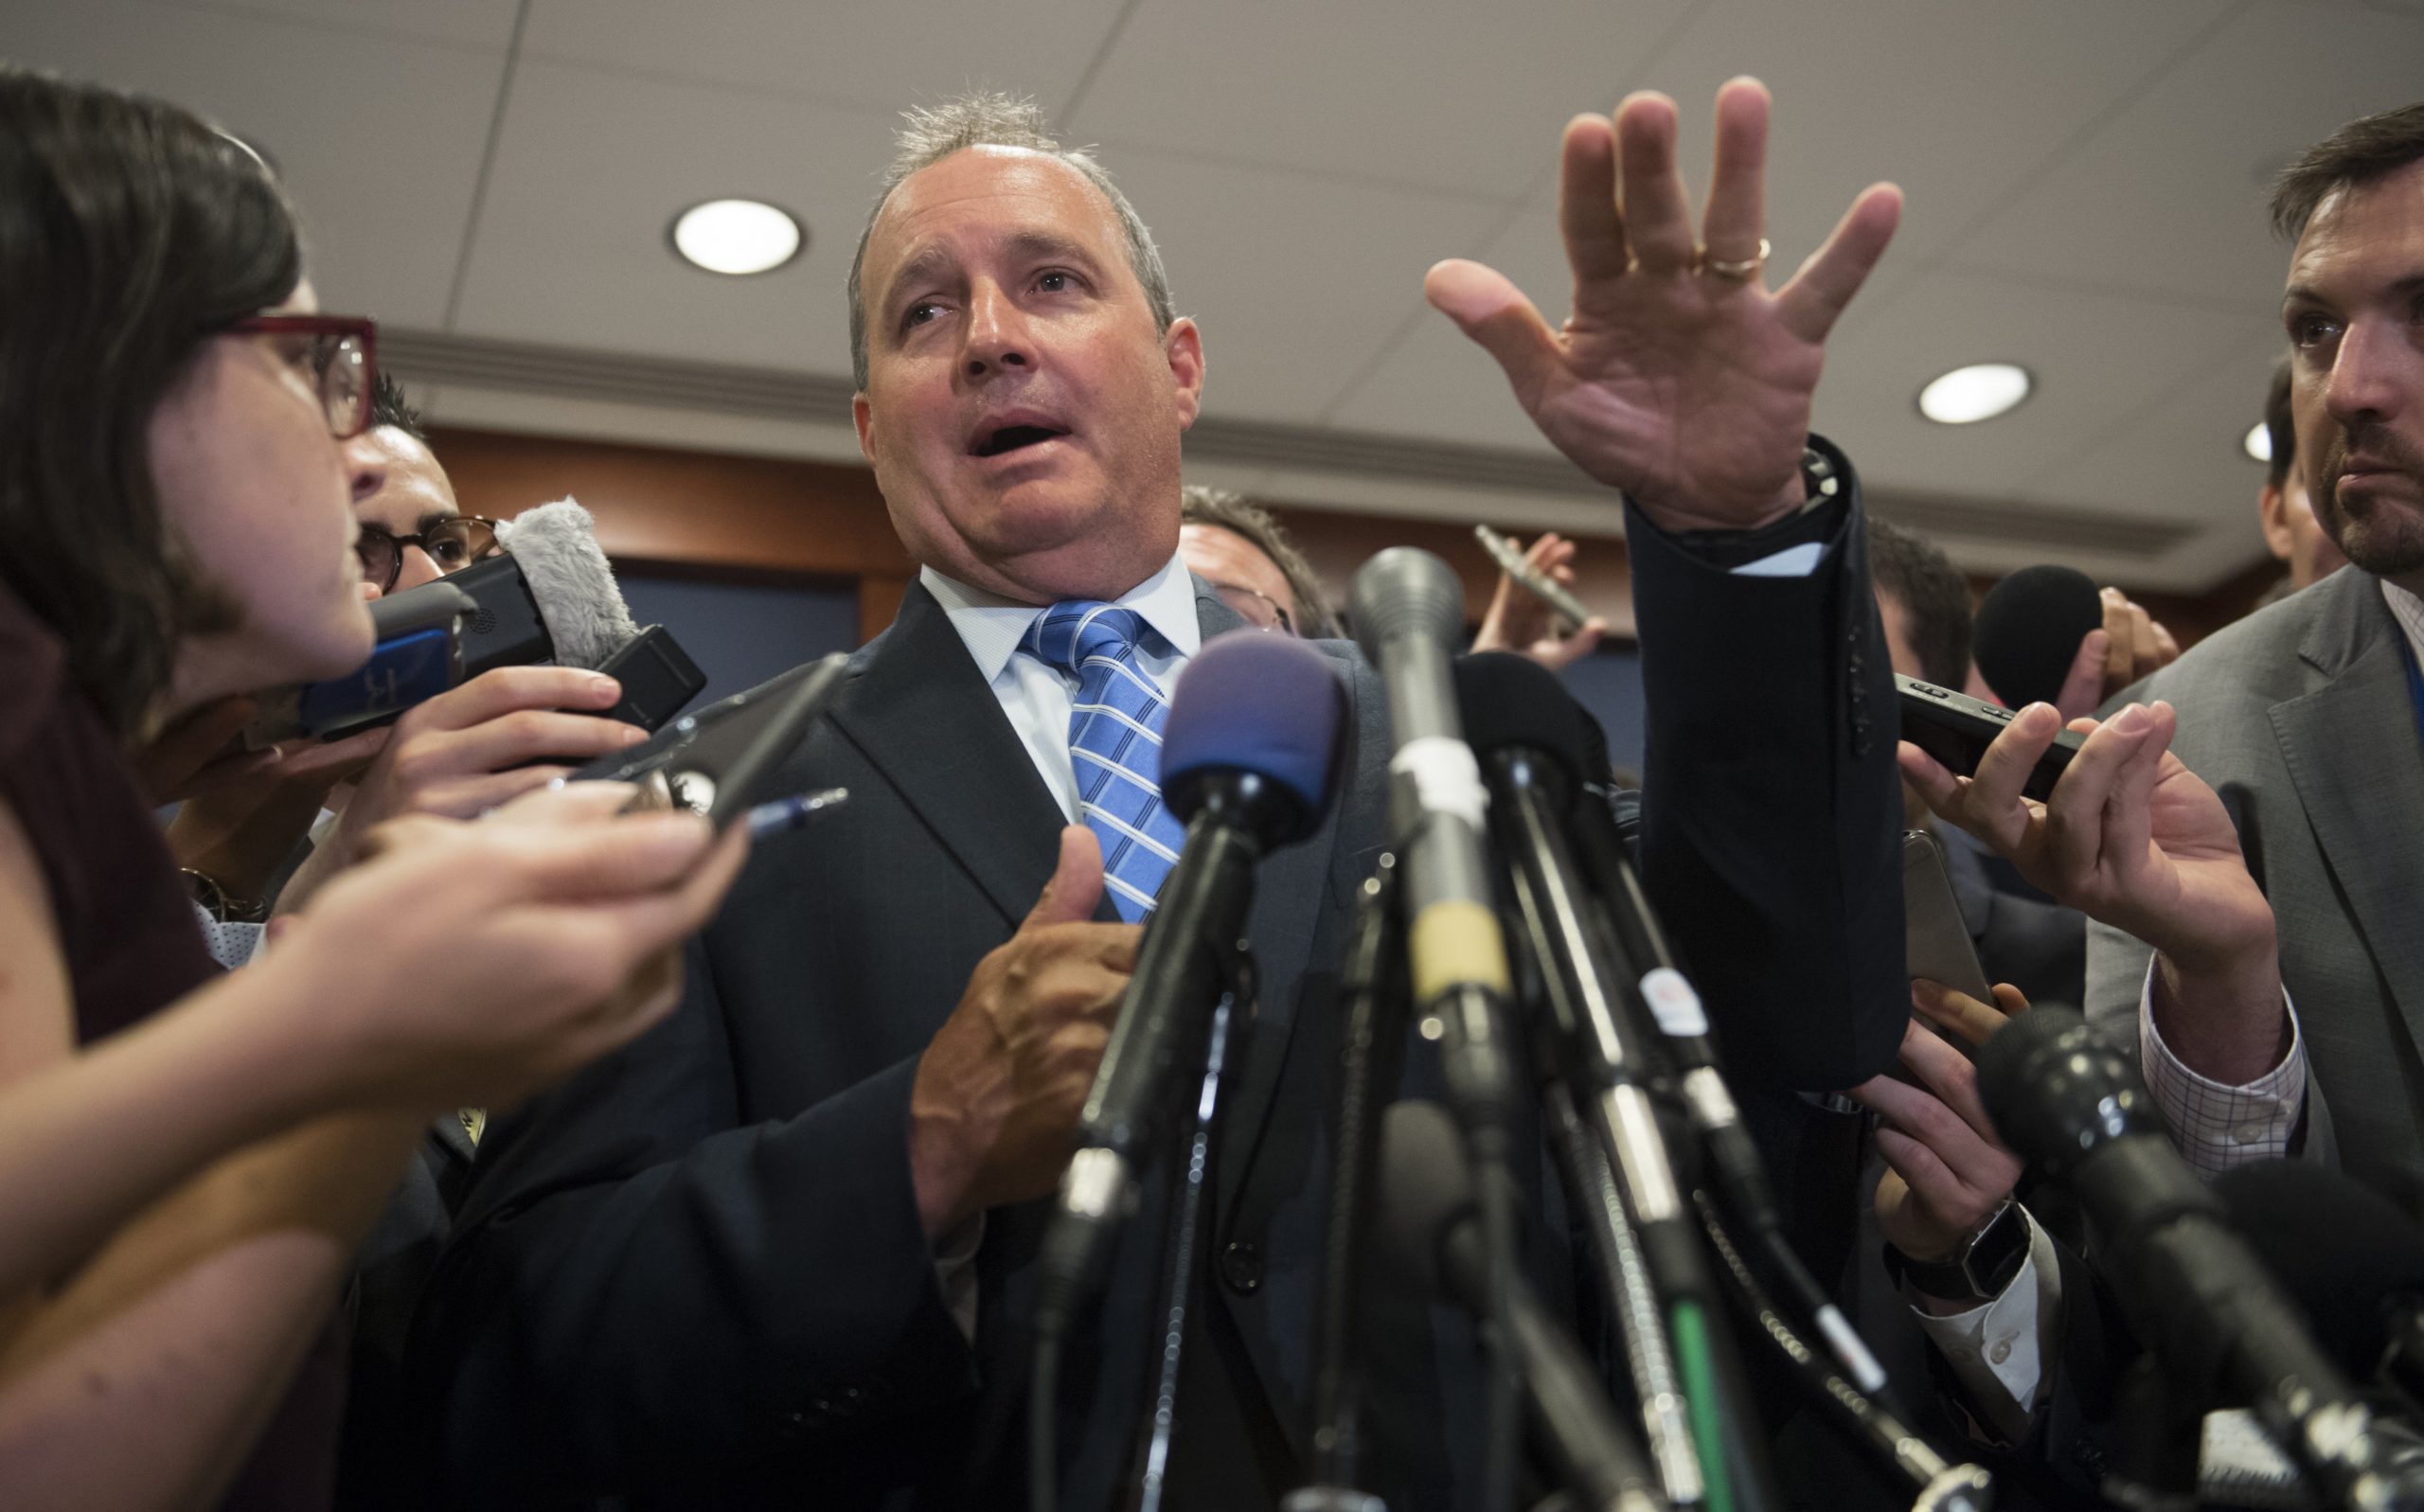 US Representative Jeff Duncan, Republican of South Carolina, speaks to the media after returning to the US Capitol from a shooting incident during a baseball practice where Duncan says he spoke with the shooter prior to the attack, as he arrives to attend a briefing for US House members on the incident at the US Capitol in Washington, DC, June 14, 2017. Several people including a top Republican congressman were wounded in a Washington suburb early Wednesday morning when a gunman opened fire as they practiced for an annual baseball game between lawmakers. / AFP PHOTO / SAUL LOEB (Photo credit should read SAUL LOEB/AFP via Getty Images)